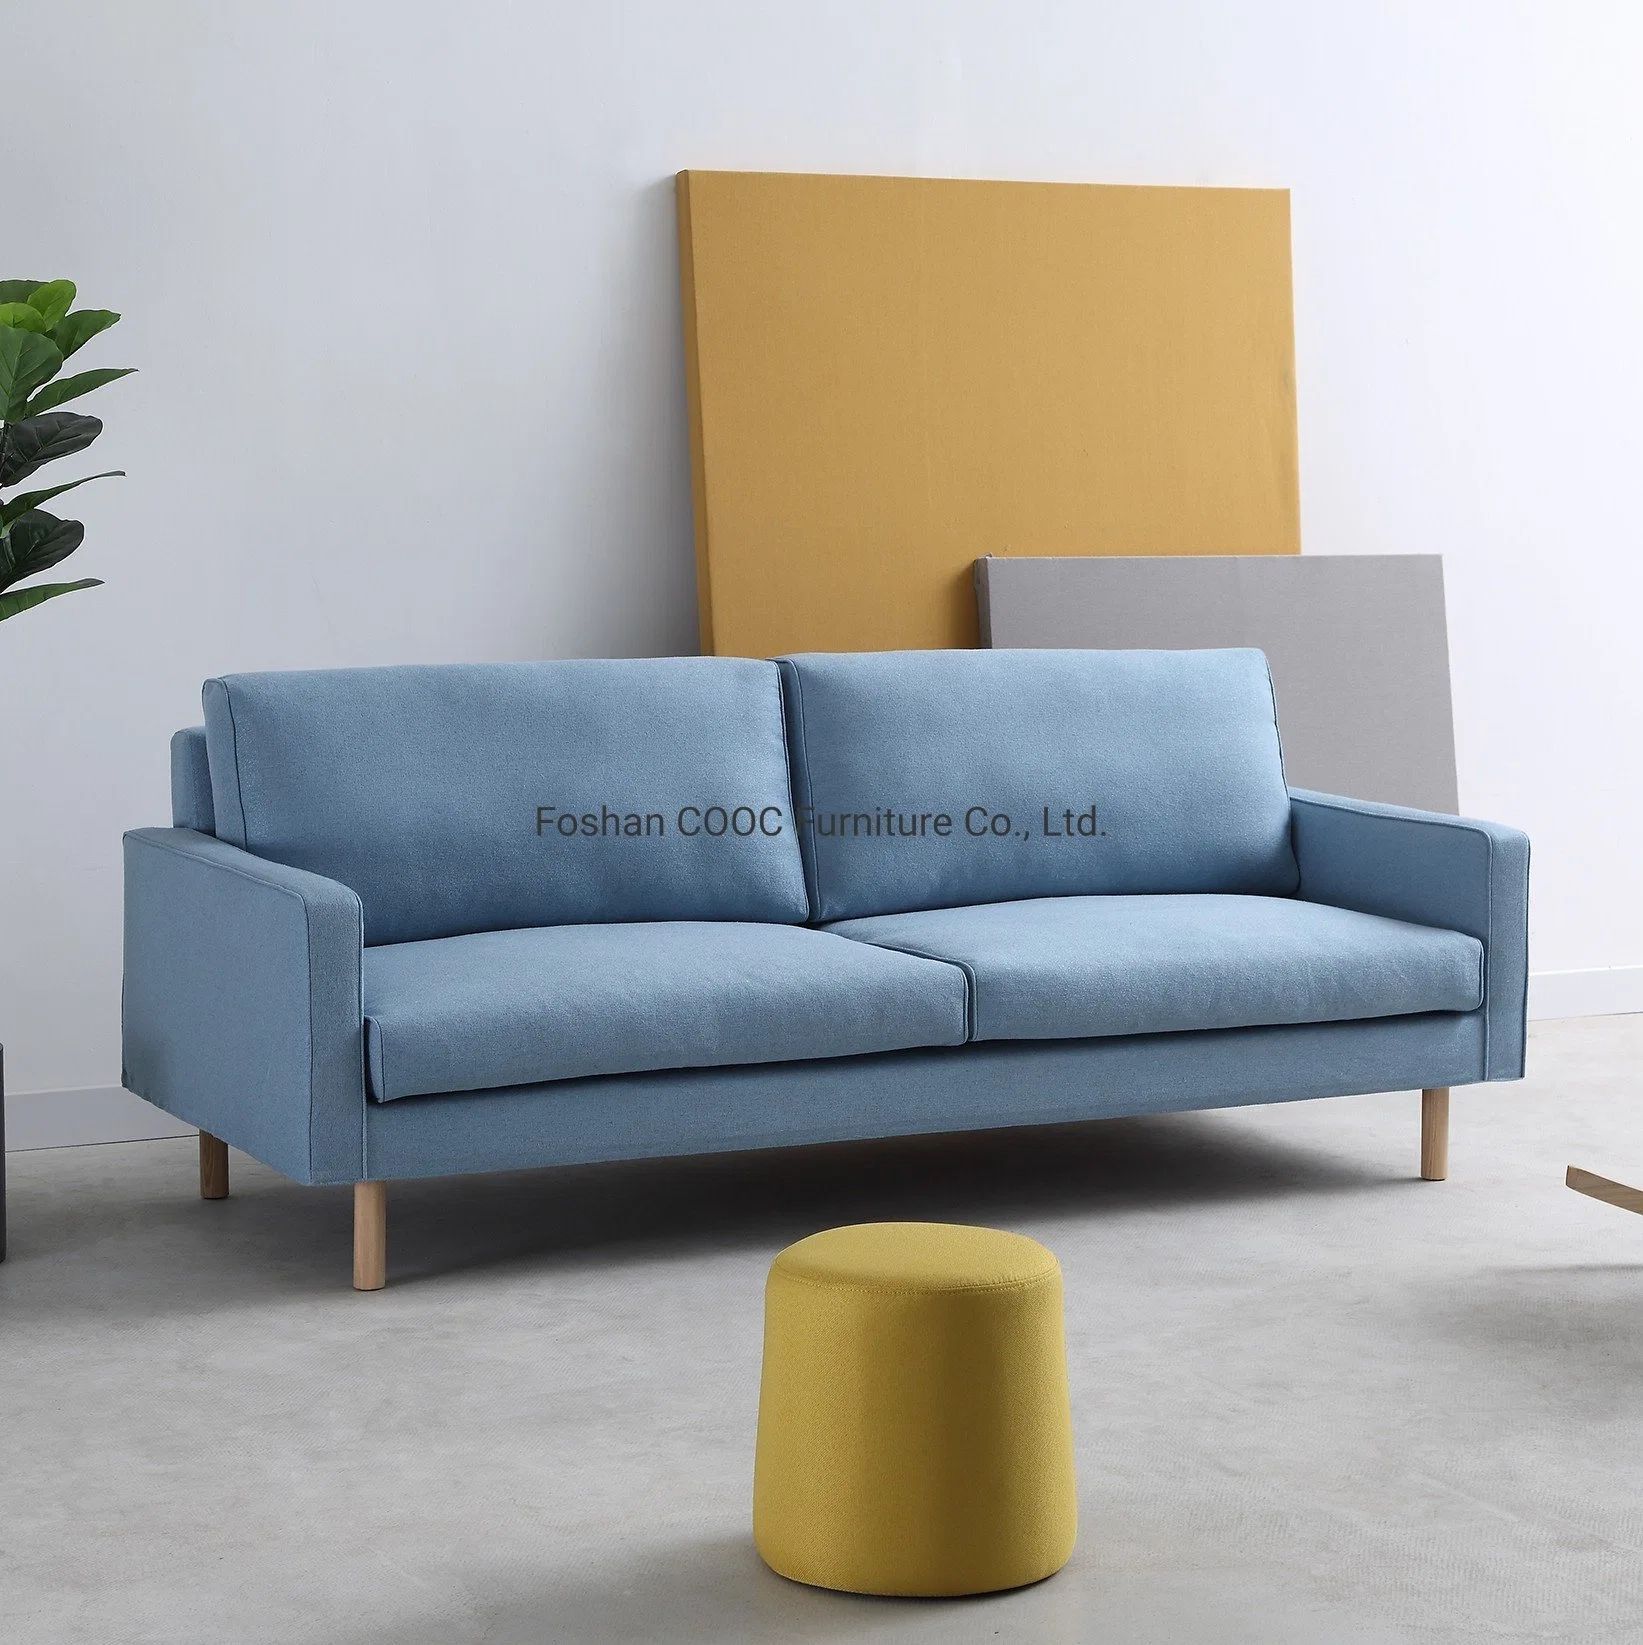 Cooc Best Chinese Wholesale Nordic Design Blue Linen Couches Sofa Set Modern  Fabric Sofa Apartment Living Room Home Furniture – China Sofa, Fabric Sofa  | Made In China Within Modern Blue Linen Sofas (View 9 of 15)